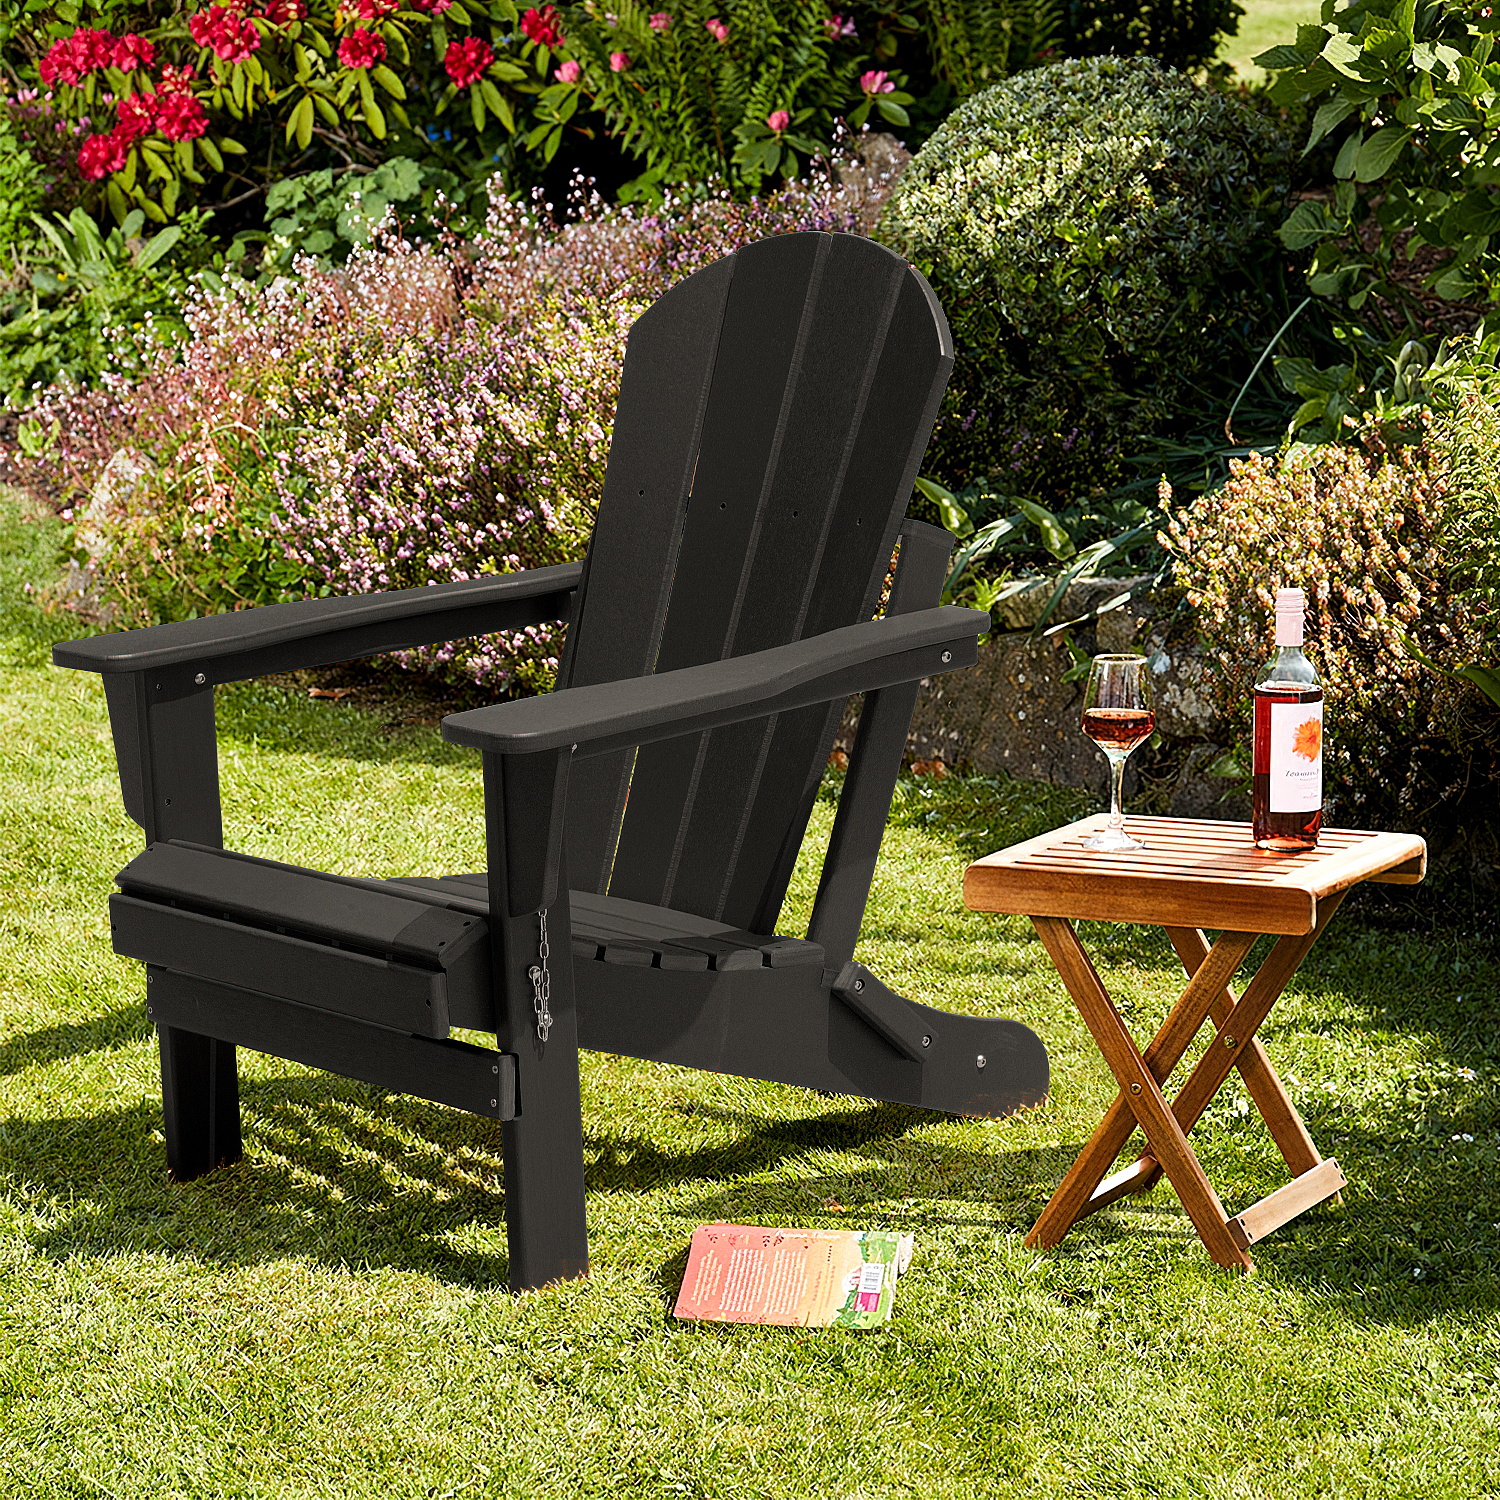 Lacoo Folding Adirondack Chair All Weather Resistant Resin Outdoor Patio Chair, Black - image 3 of 7